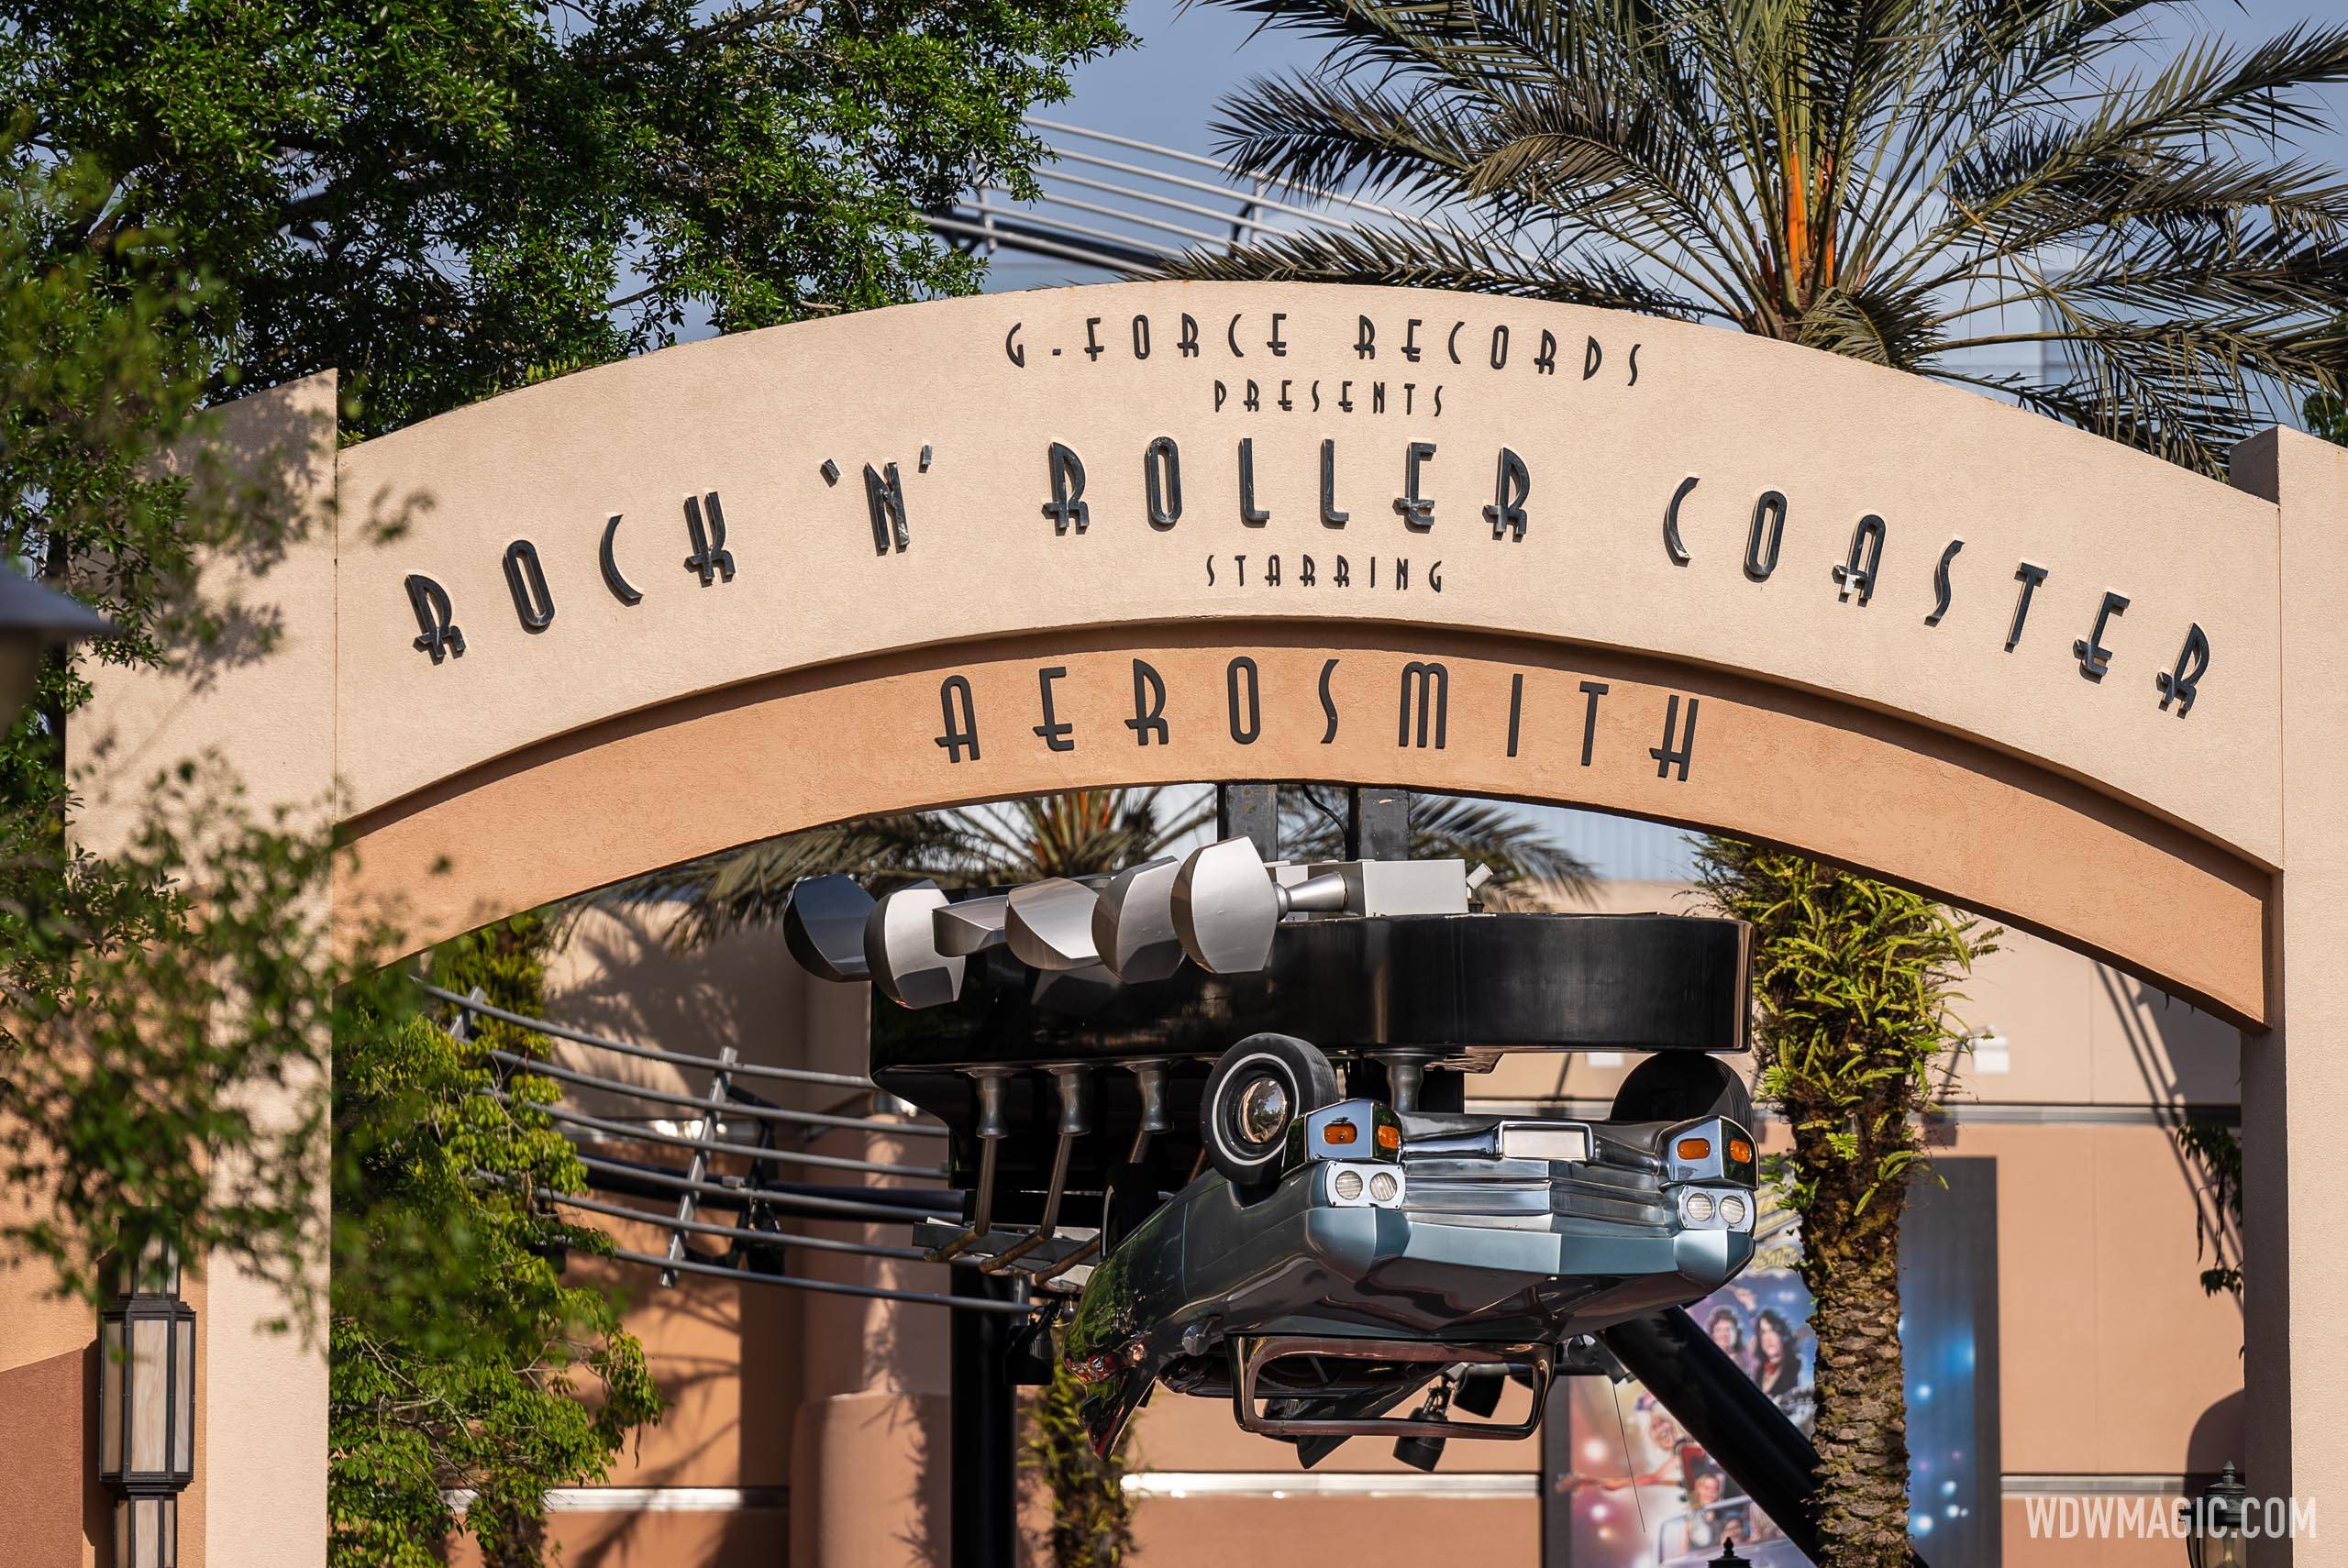 CONFIRMED: Rock 'n' Roller Coaster's Extended Closure Will Last